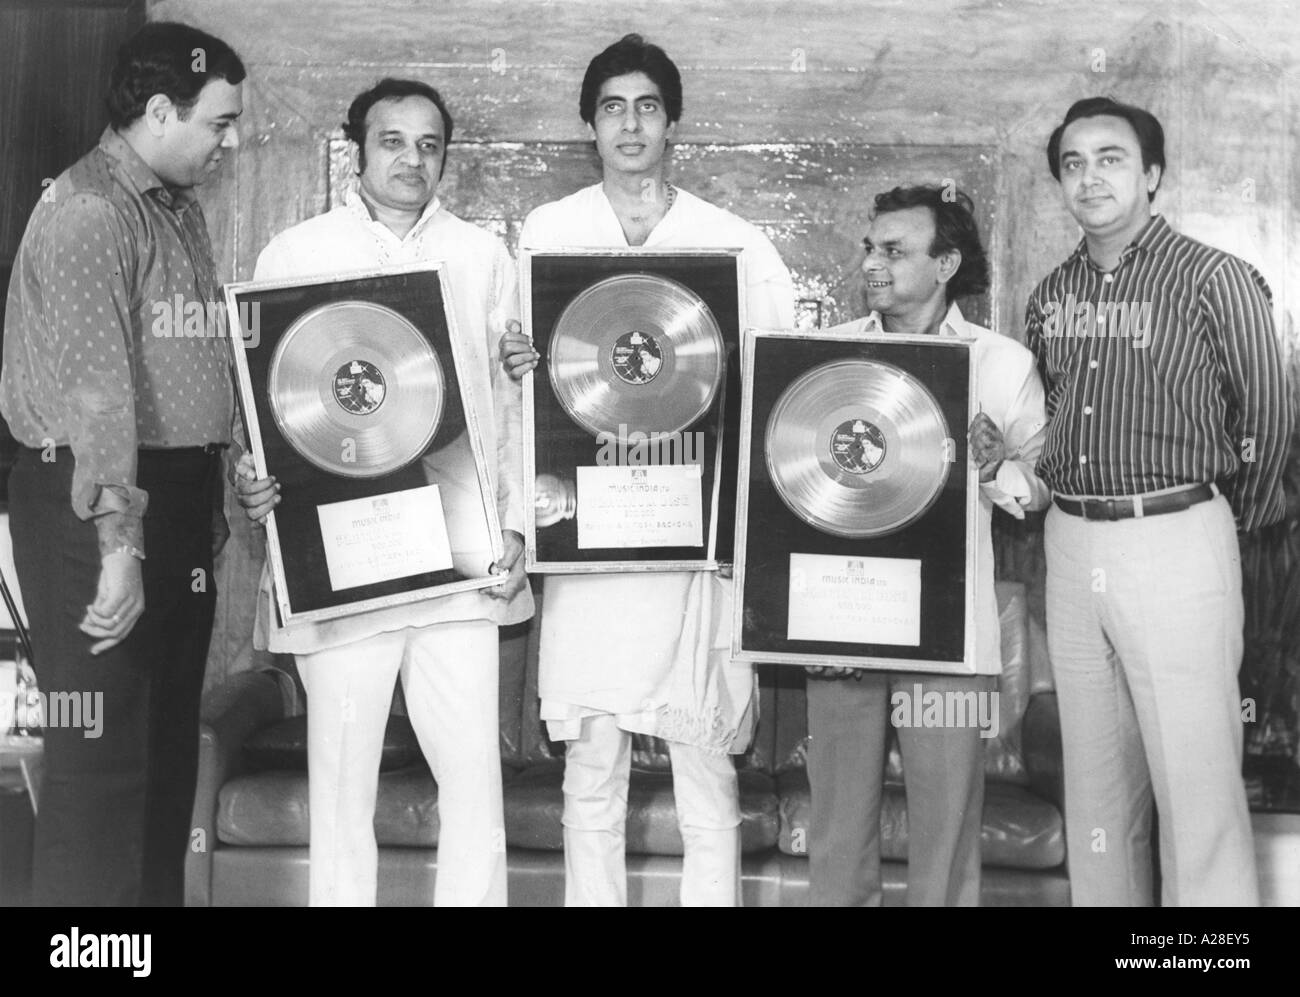 Indian Bollywood Film Star Actor Amitabh Bachchan with Kalyanji Ananadji in music release function India Stock Photo